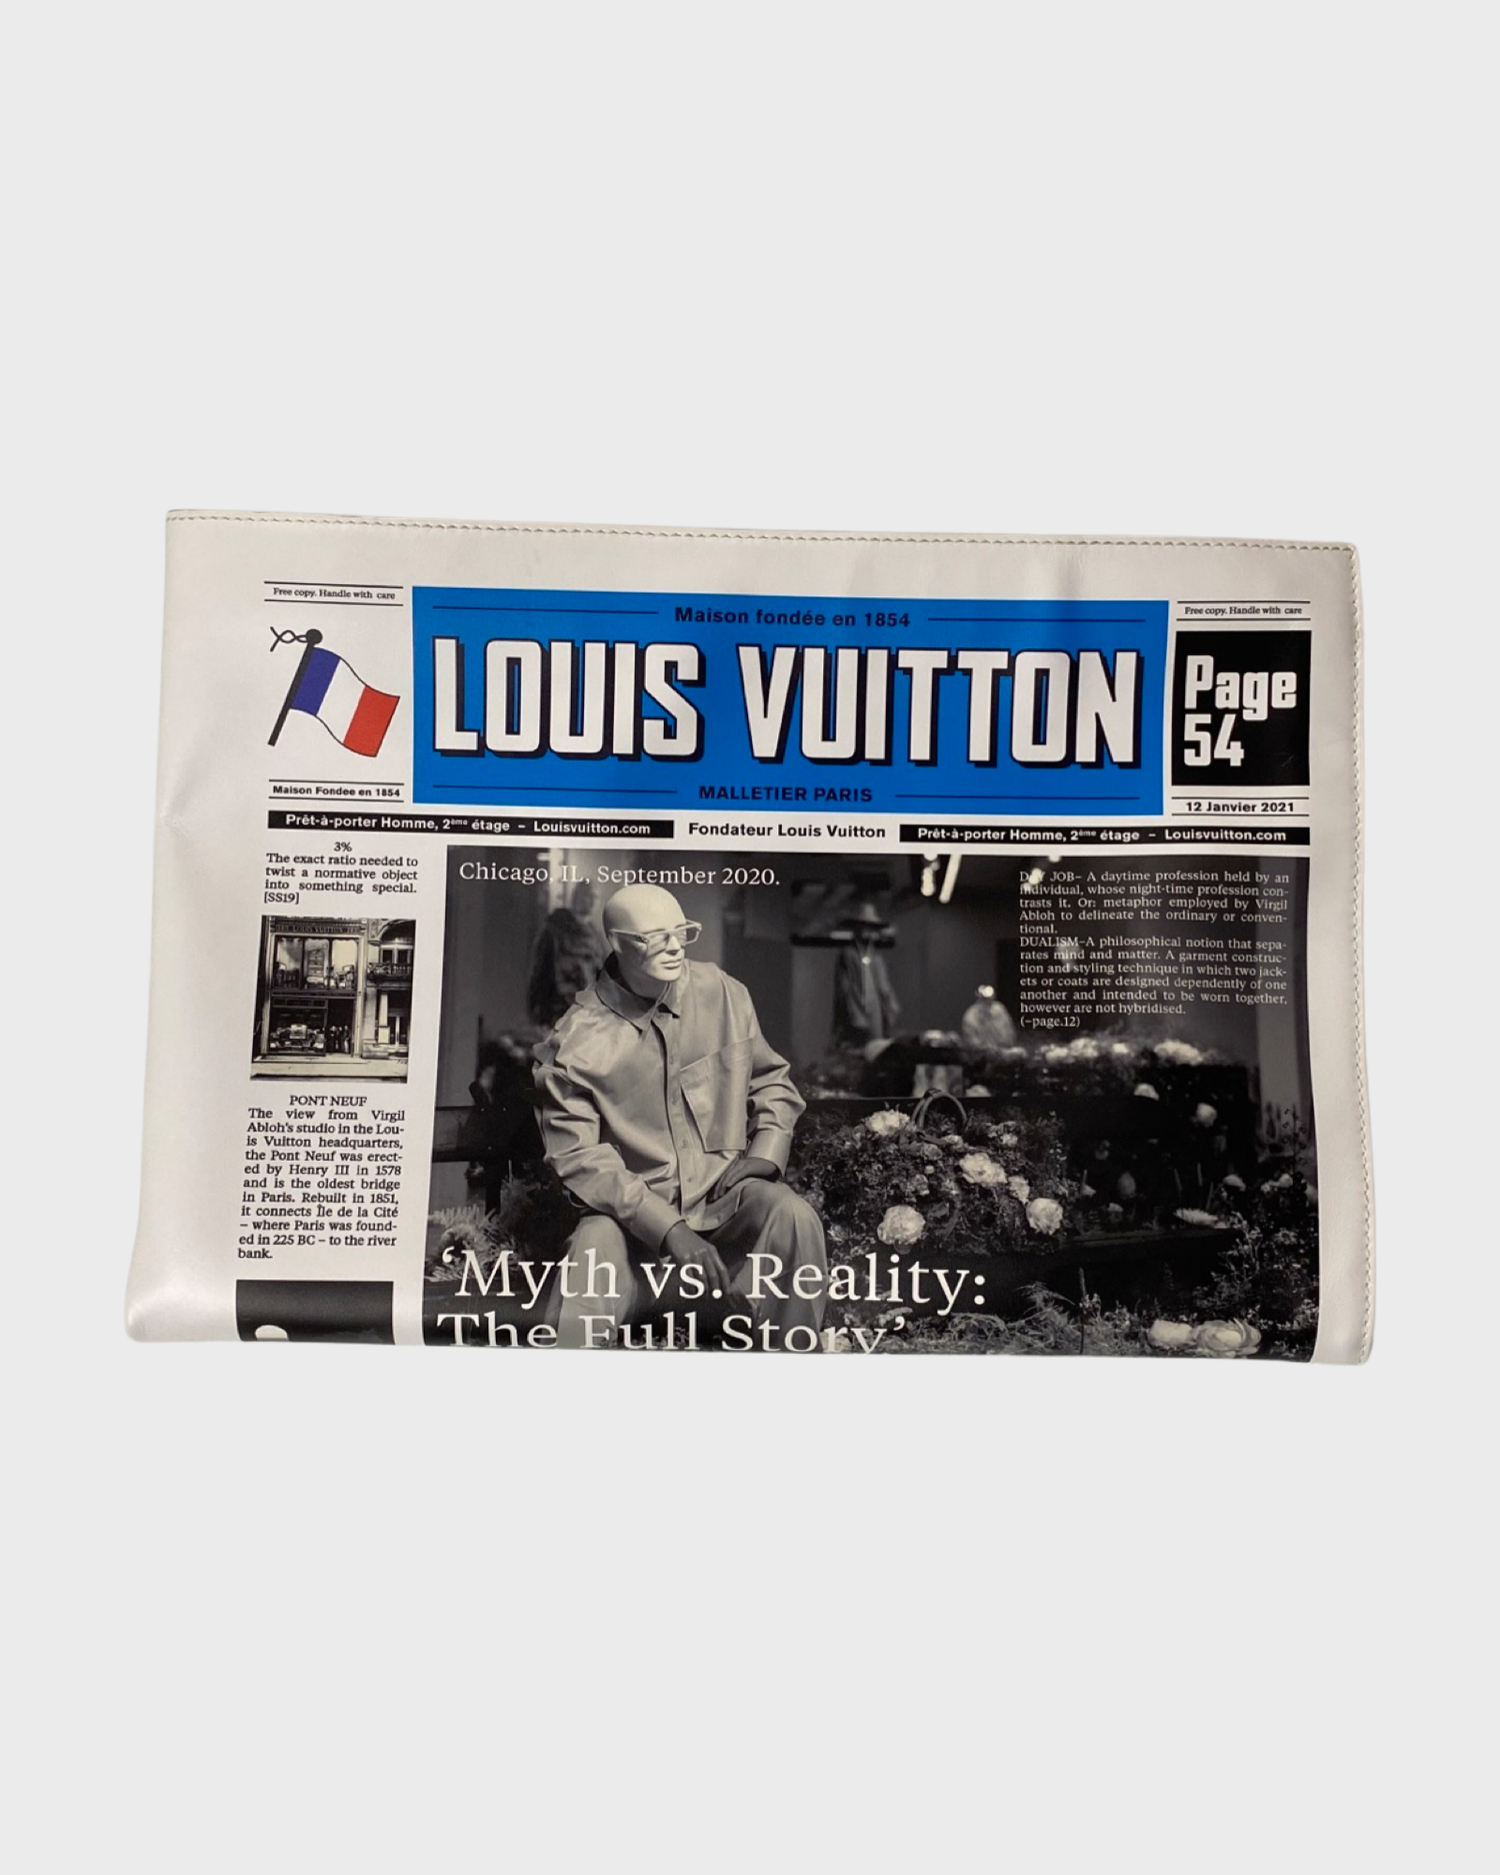 404 Not Found 1  Retro bags, Louis vuitton limited edition, Bags